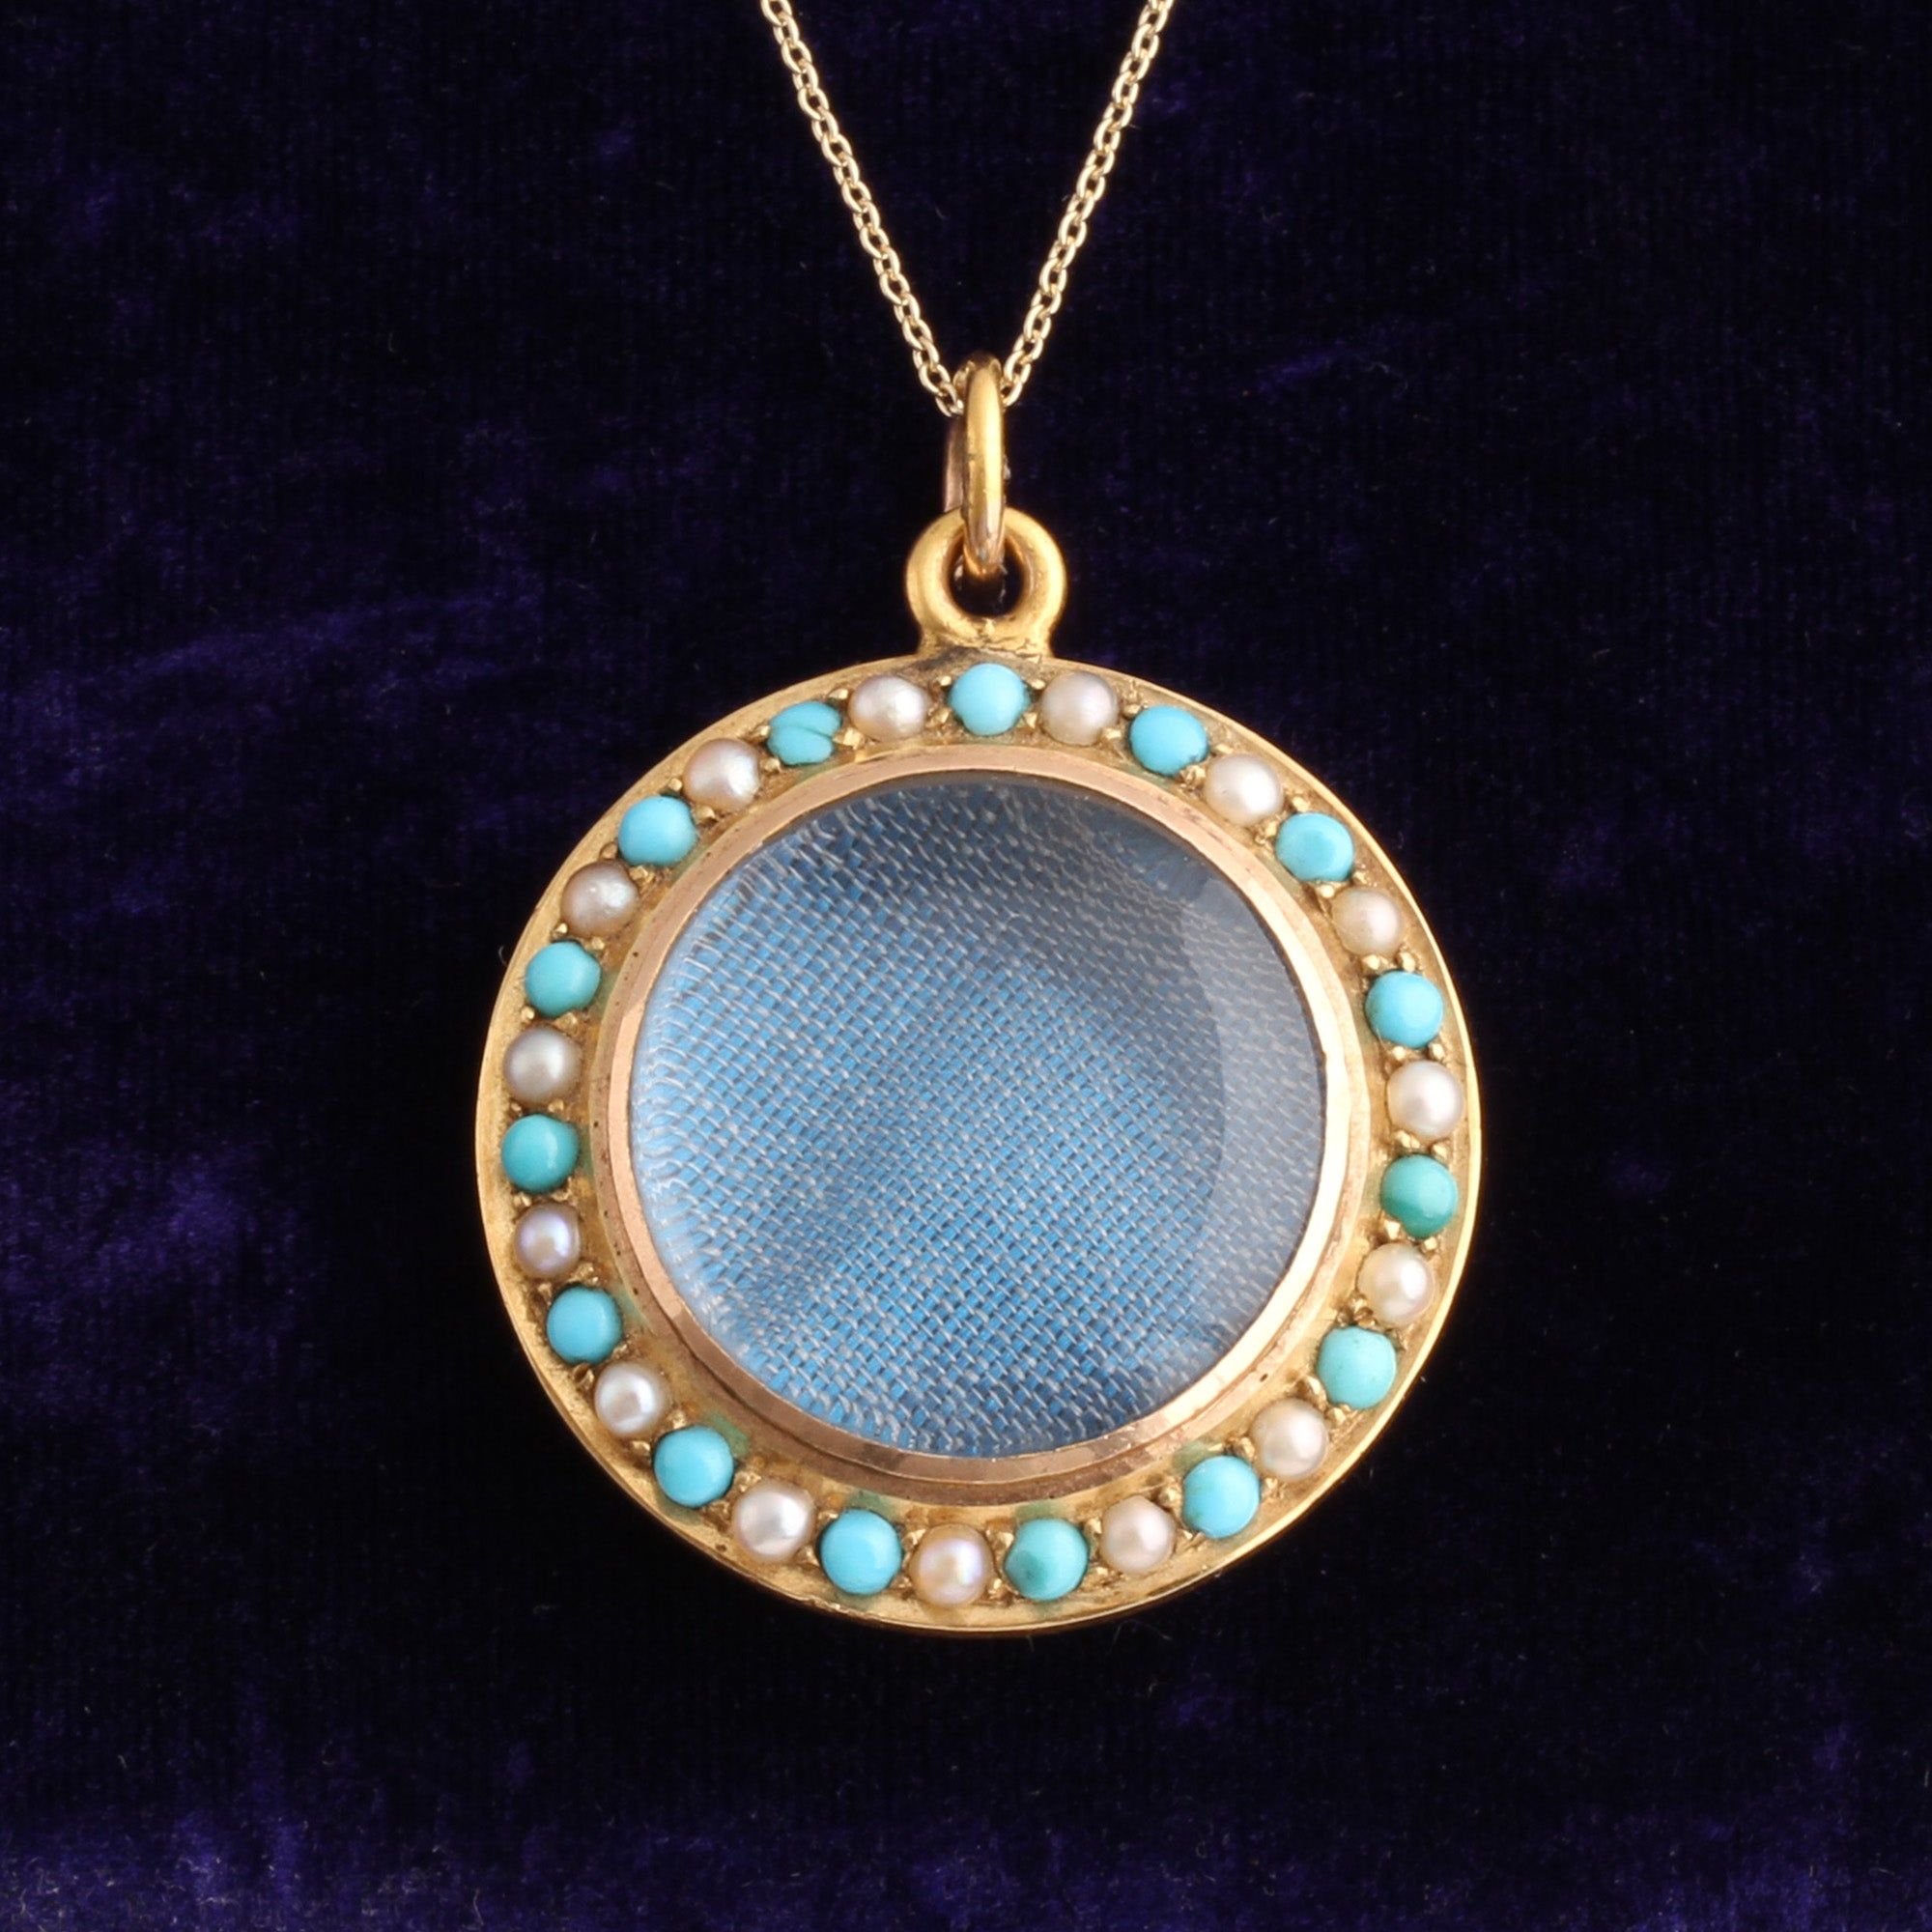 Detail of Victorian Turquoise & Pearl Locket